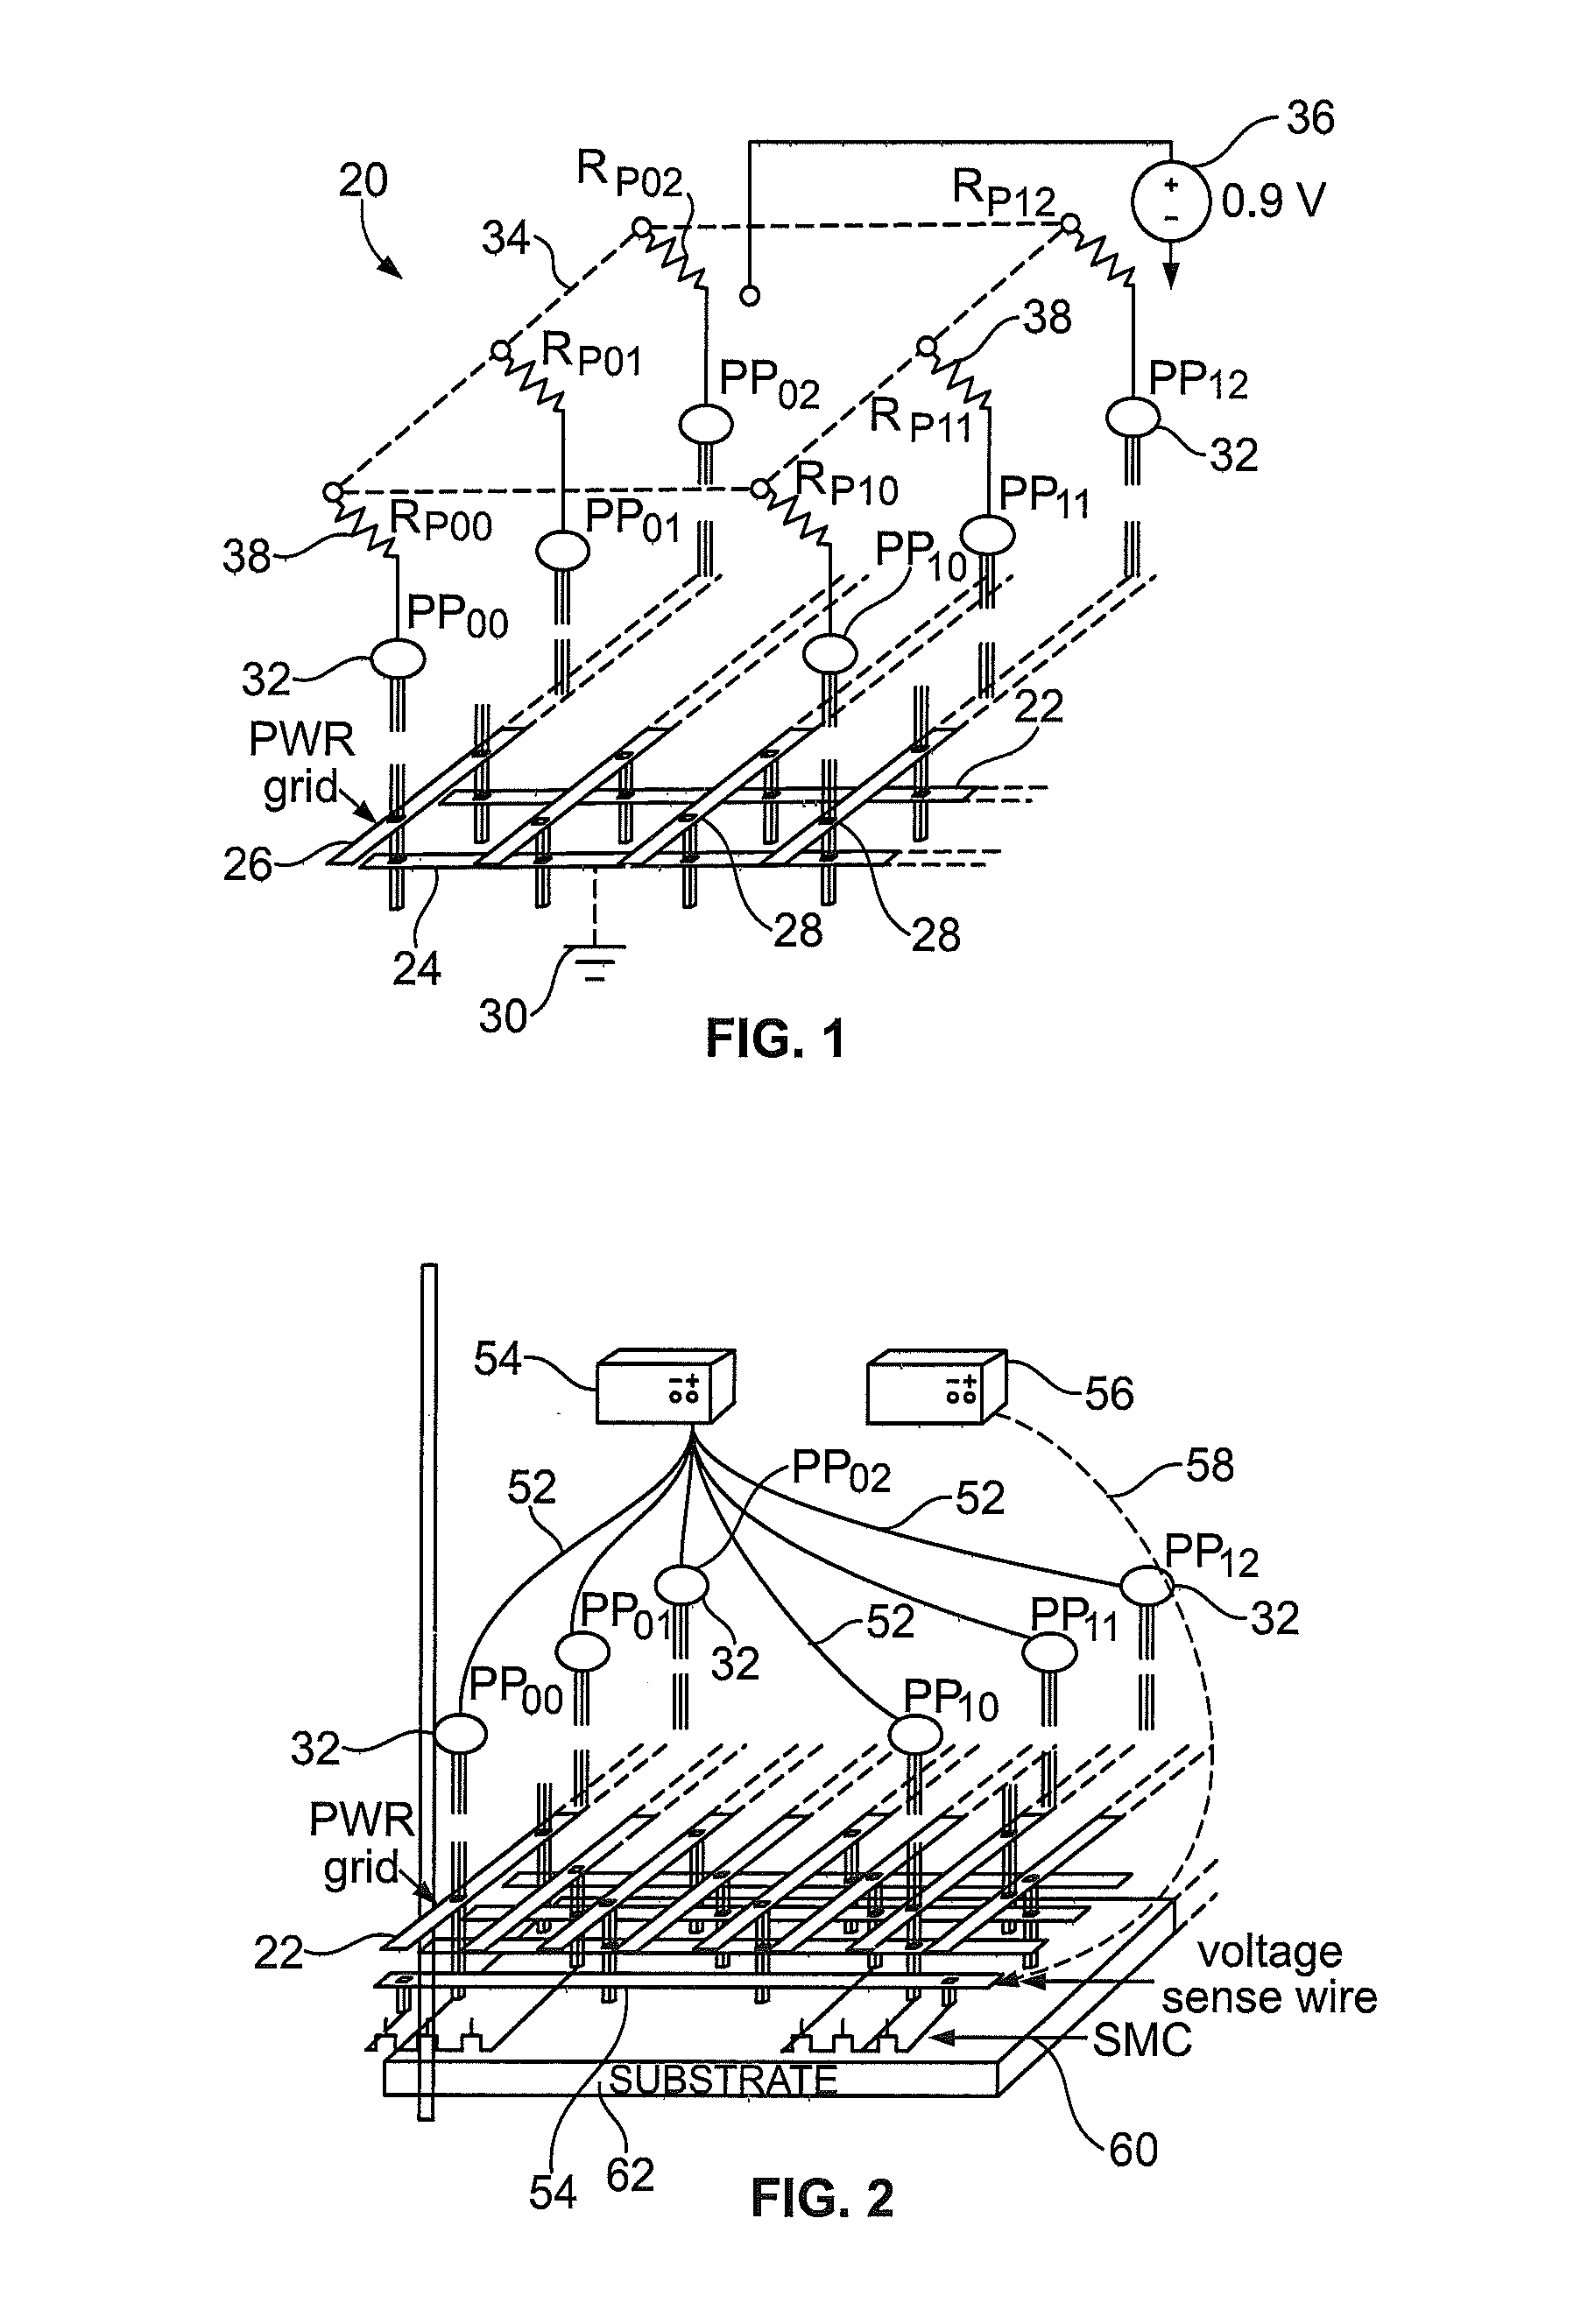 System and methods for generating unclonable security keys in integrated circuits